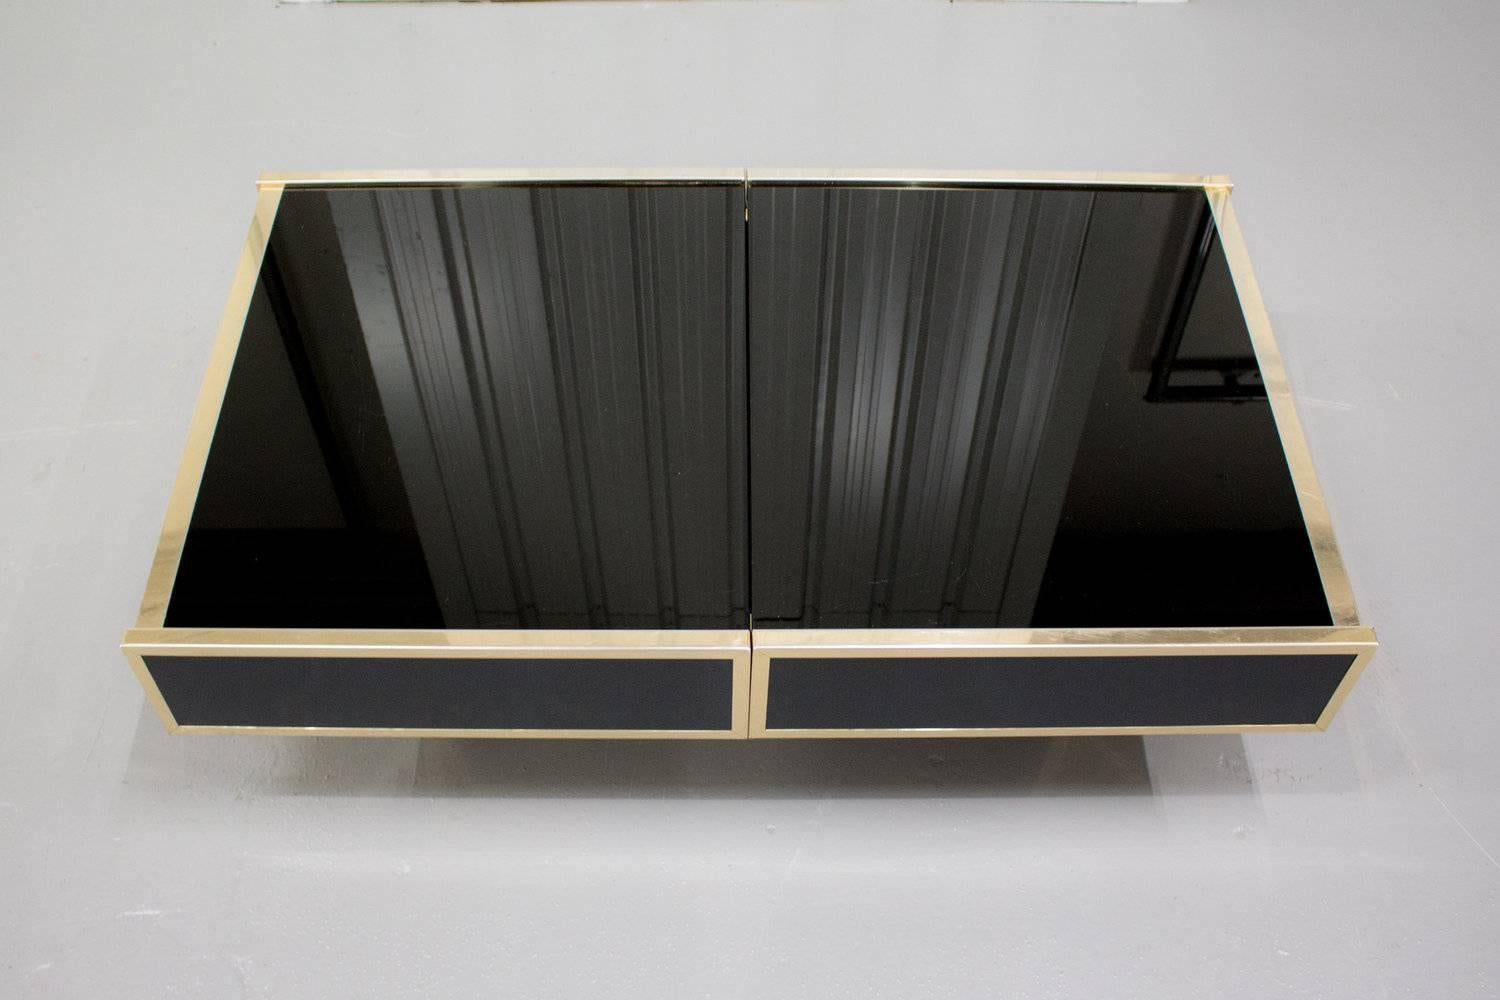 The coffee table of coffee tables. Willy Rizzo for Cidue black mirrored and lacquered extendable coffee table with brass detailing. This beautiful piece of craftsmanship is extendable to reveal a hidden dry bar on the inside of the table,